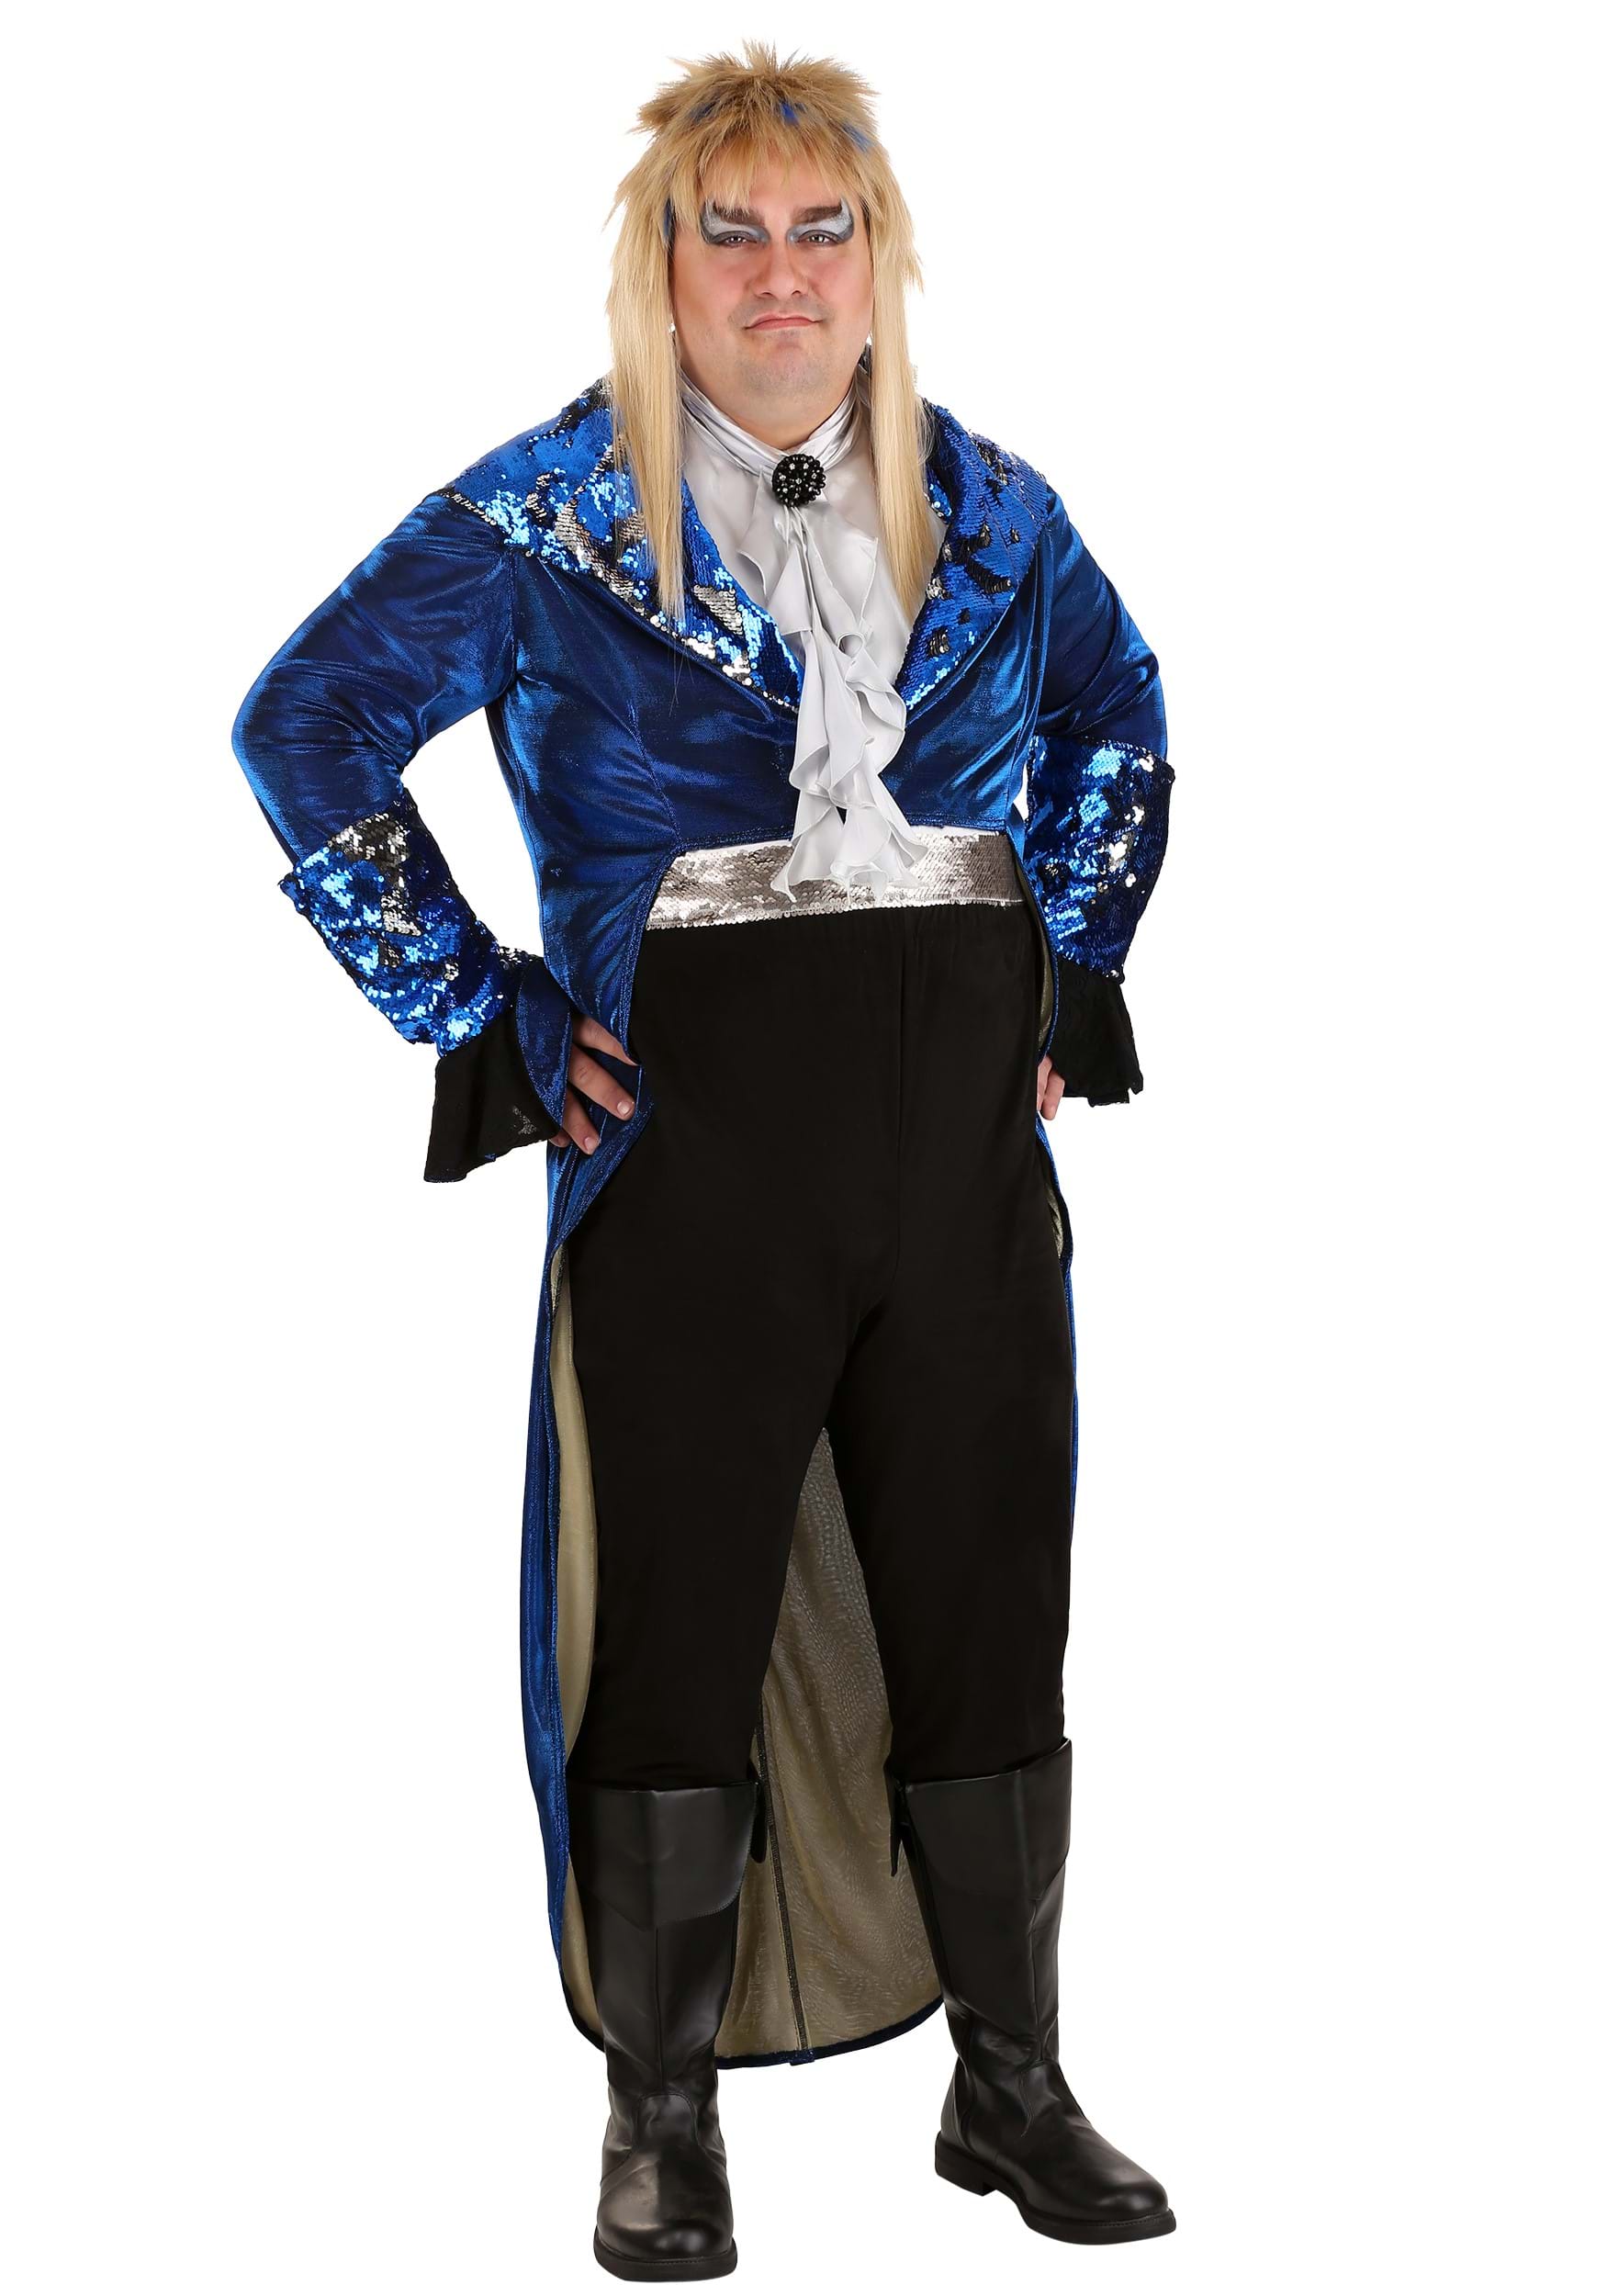 Photos - Fancy Dress Deluxe FUN Costumes Plus Size Adult Labyrinth  Jareth Costume Blue/Whit 